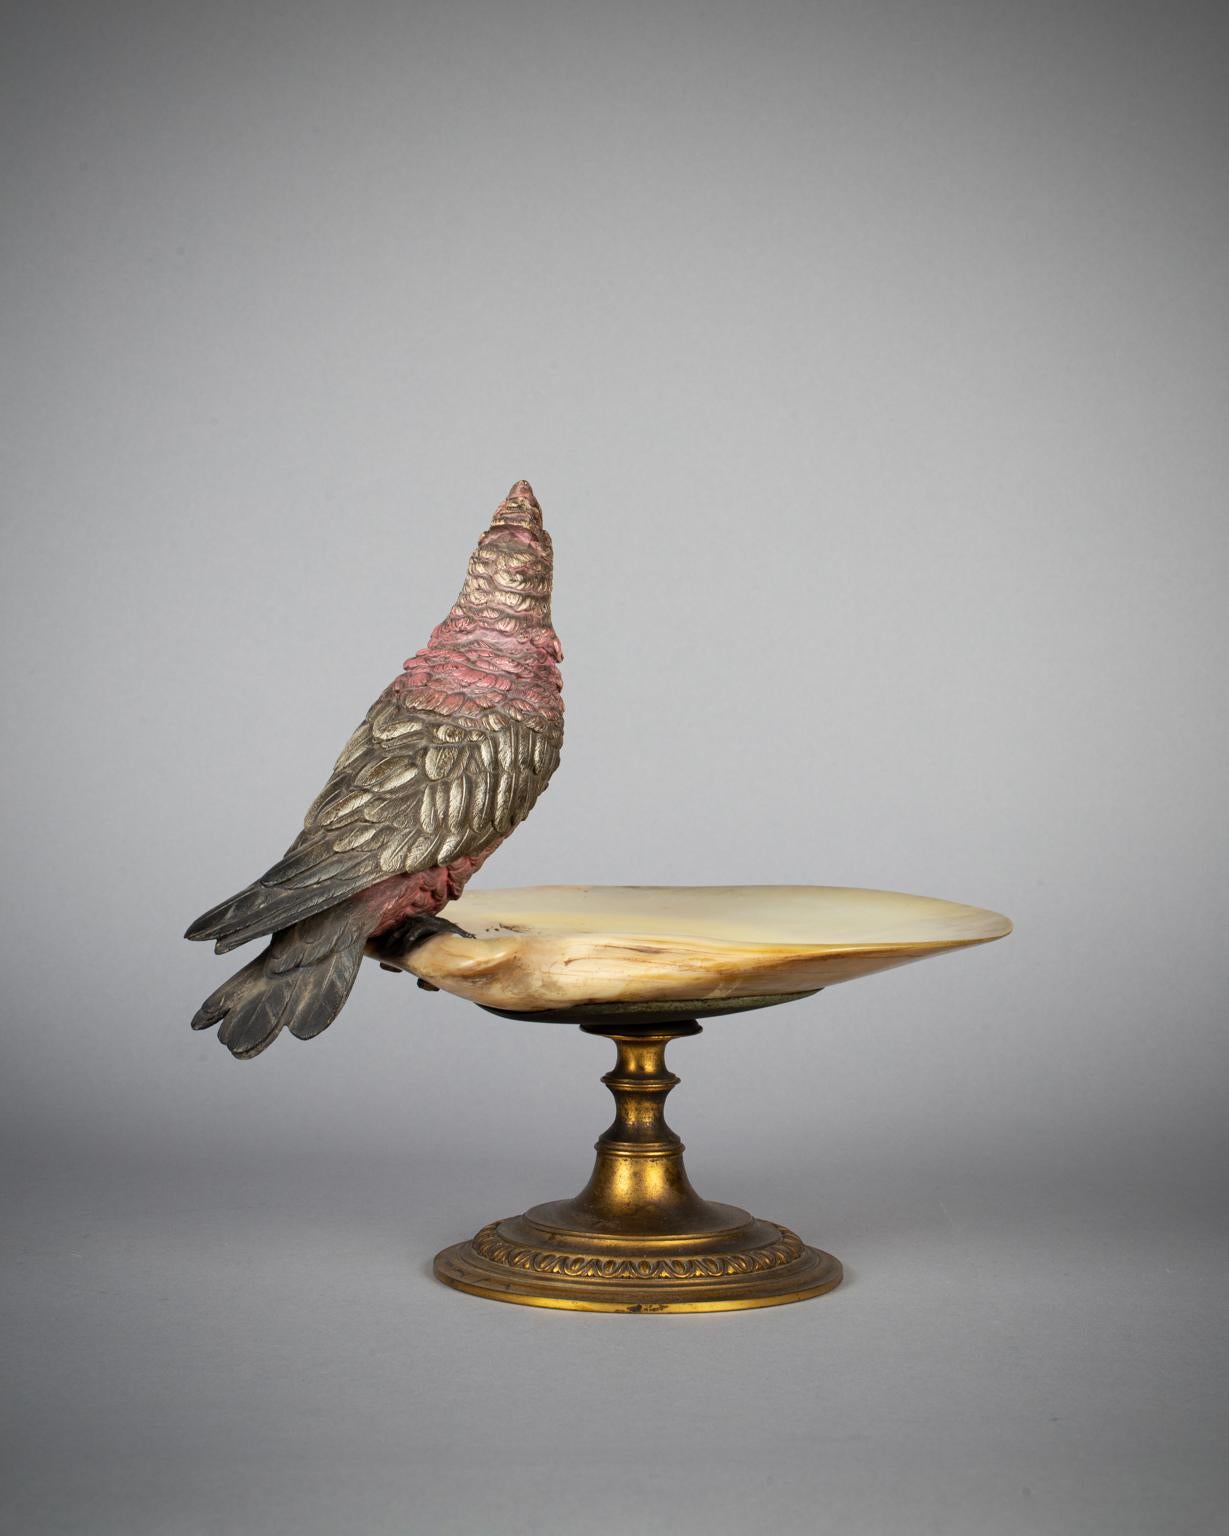 Modeled as a parrot with pink and yellow feathers mounted to the edge of a basin made from an abalone shell, raised on a circular gilt metal base.